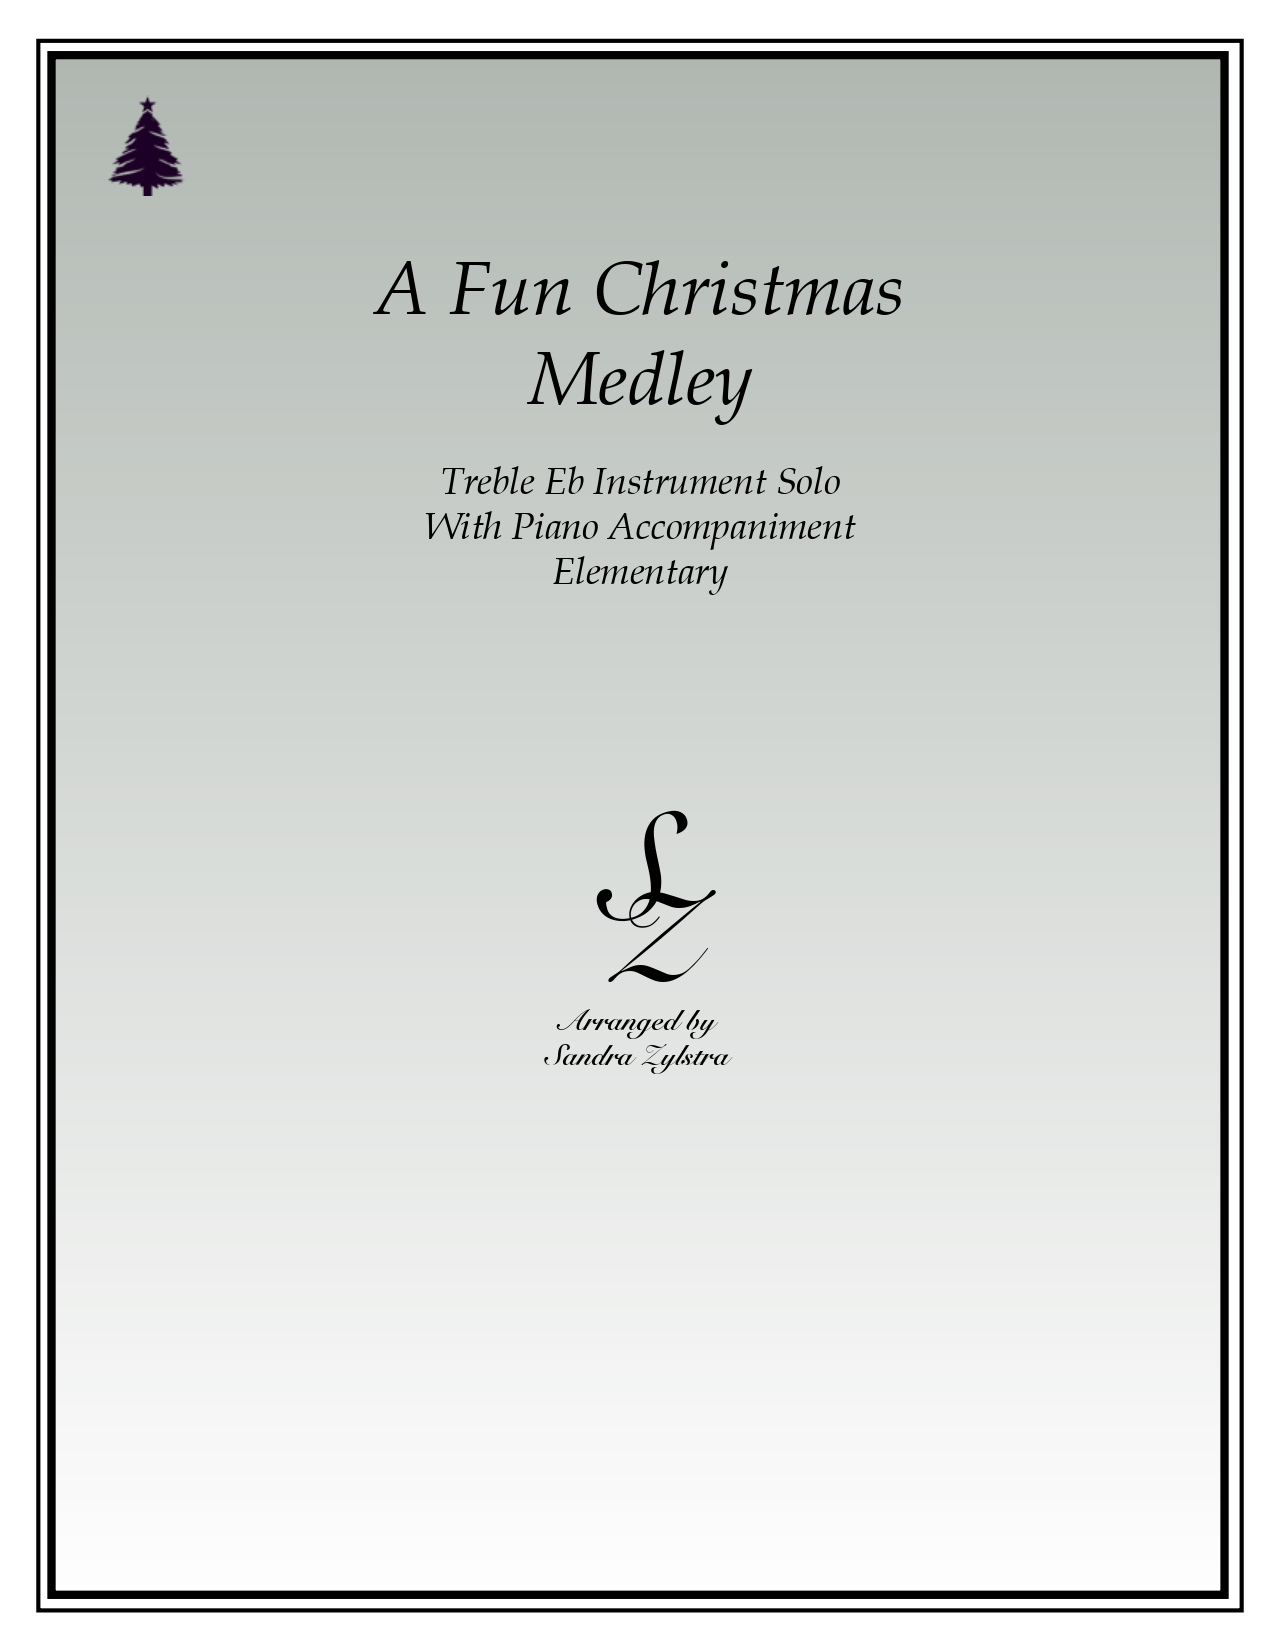 A Fun Christmas Medley Eb instrument solo parts cover page 00011